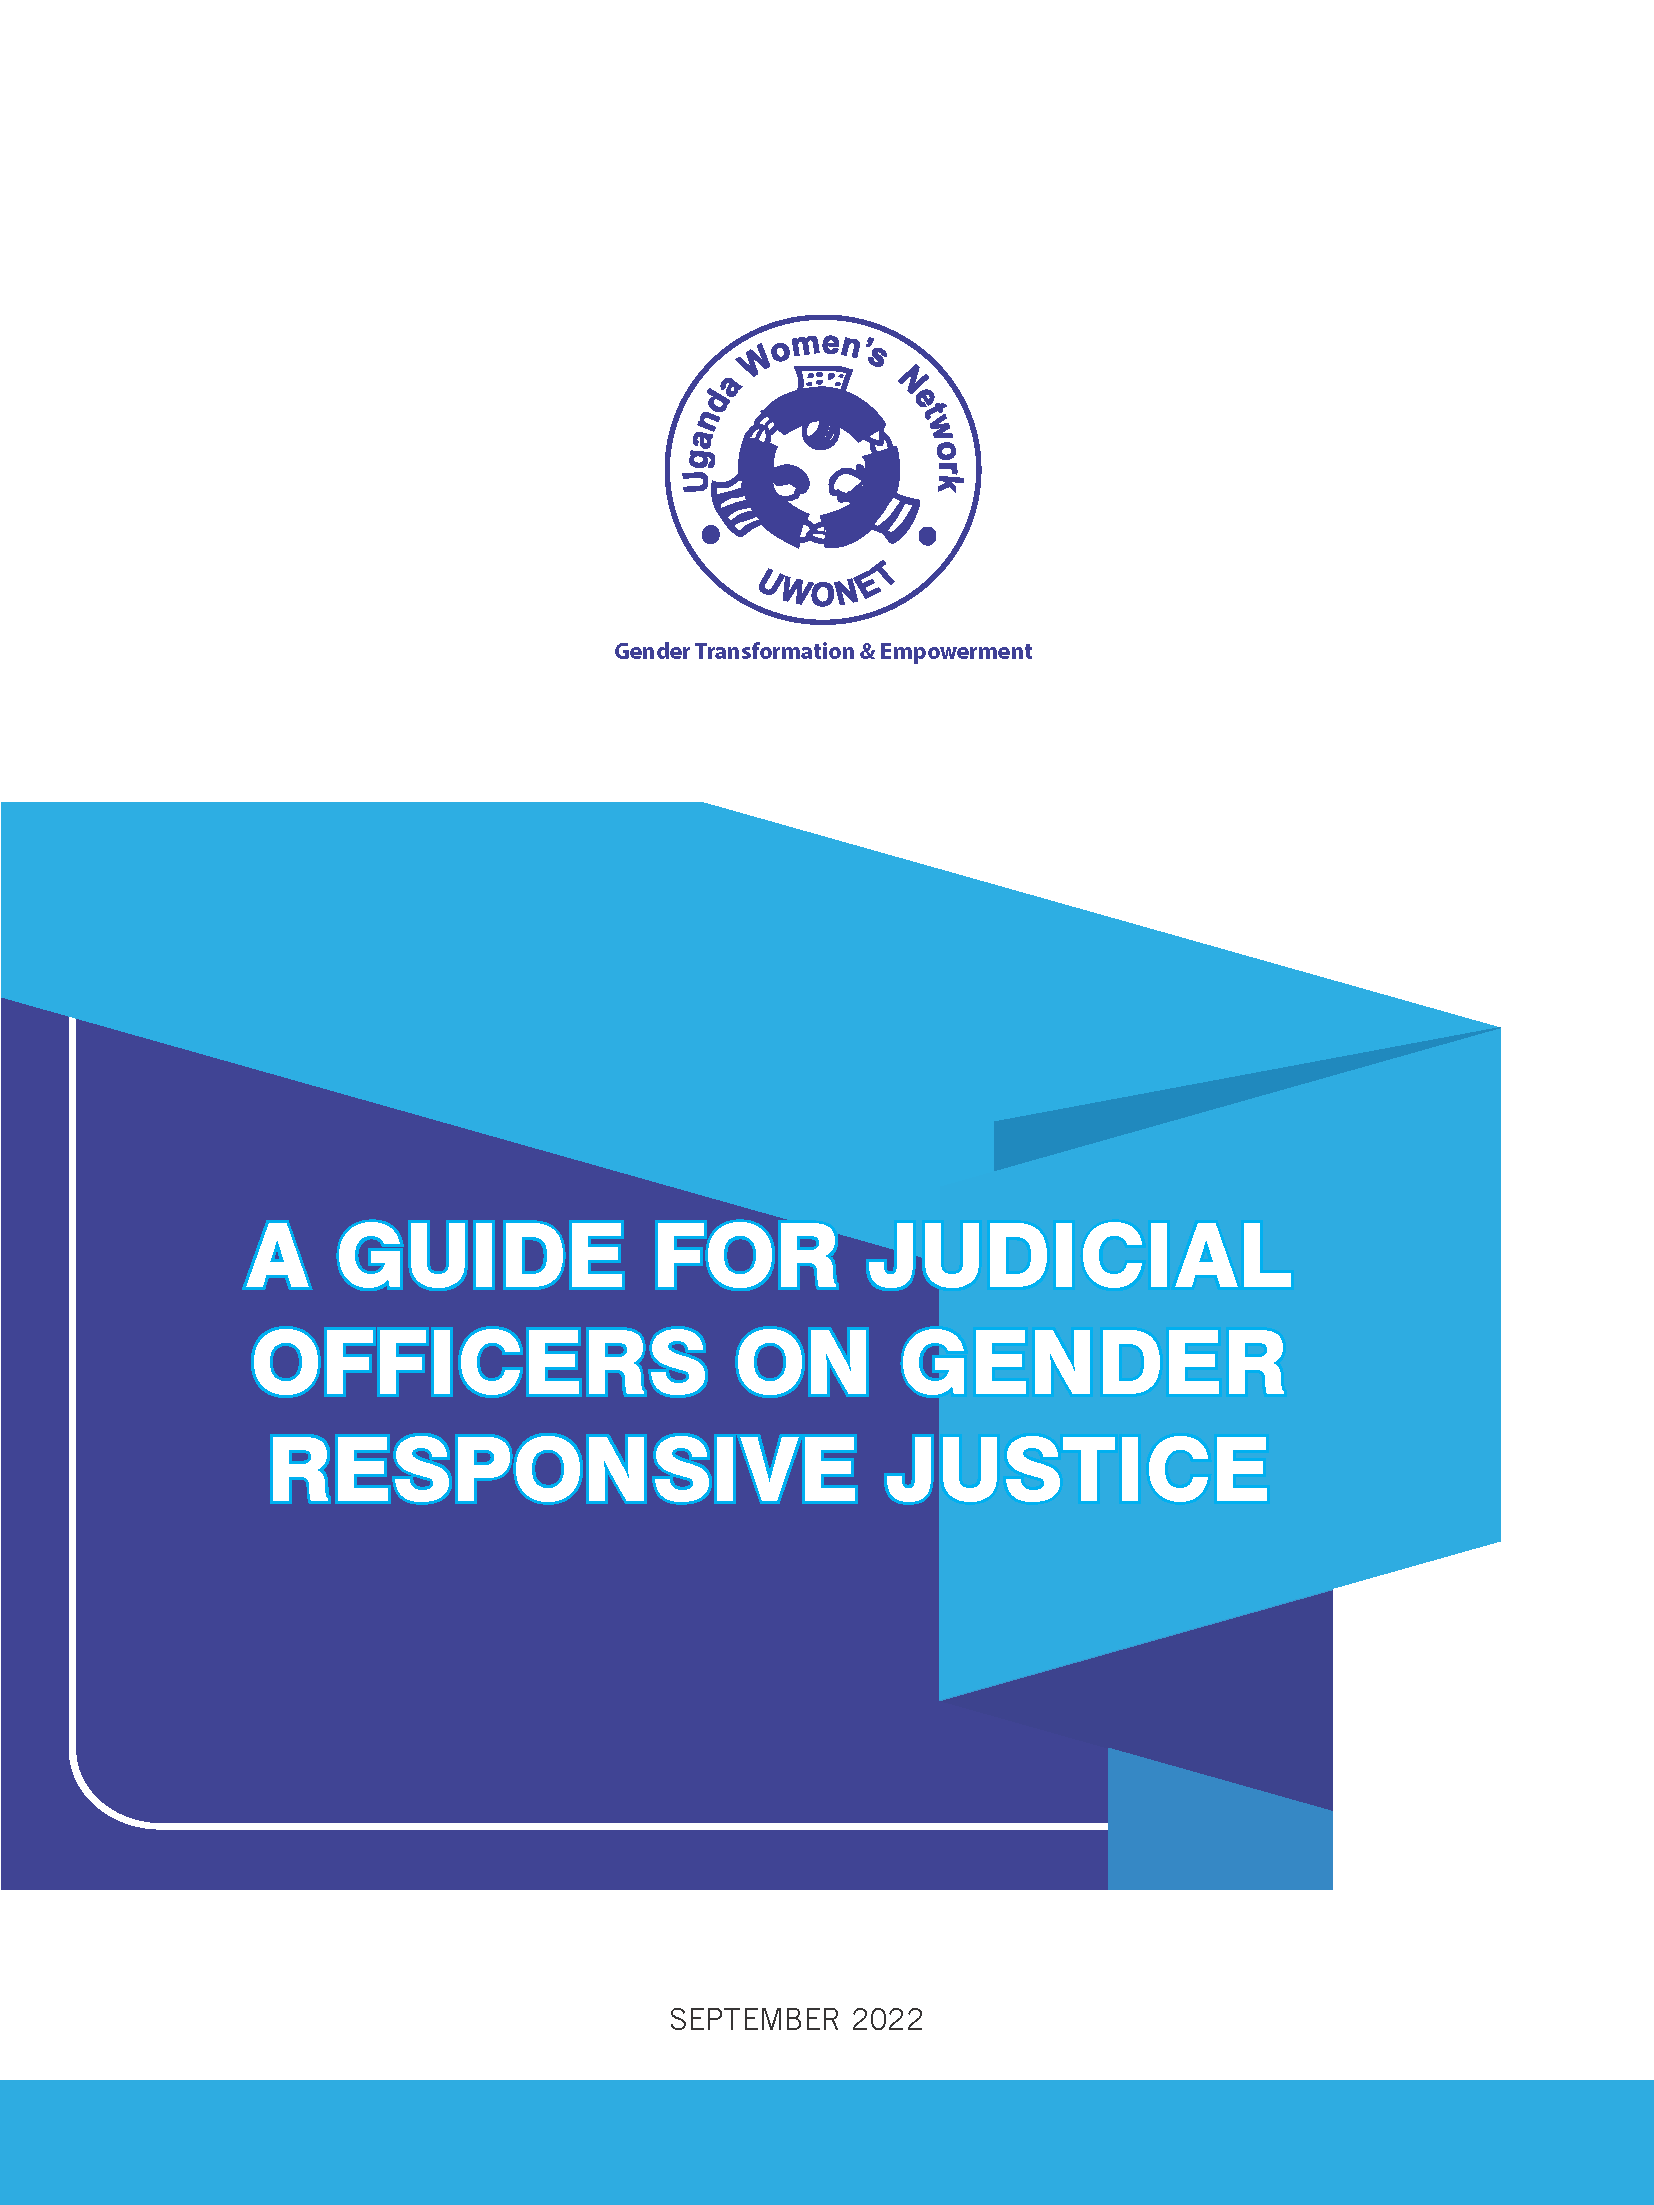 A Guide for Judicial Officers on Gender-Responsive Justice (2022)